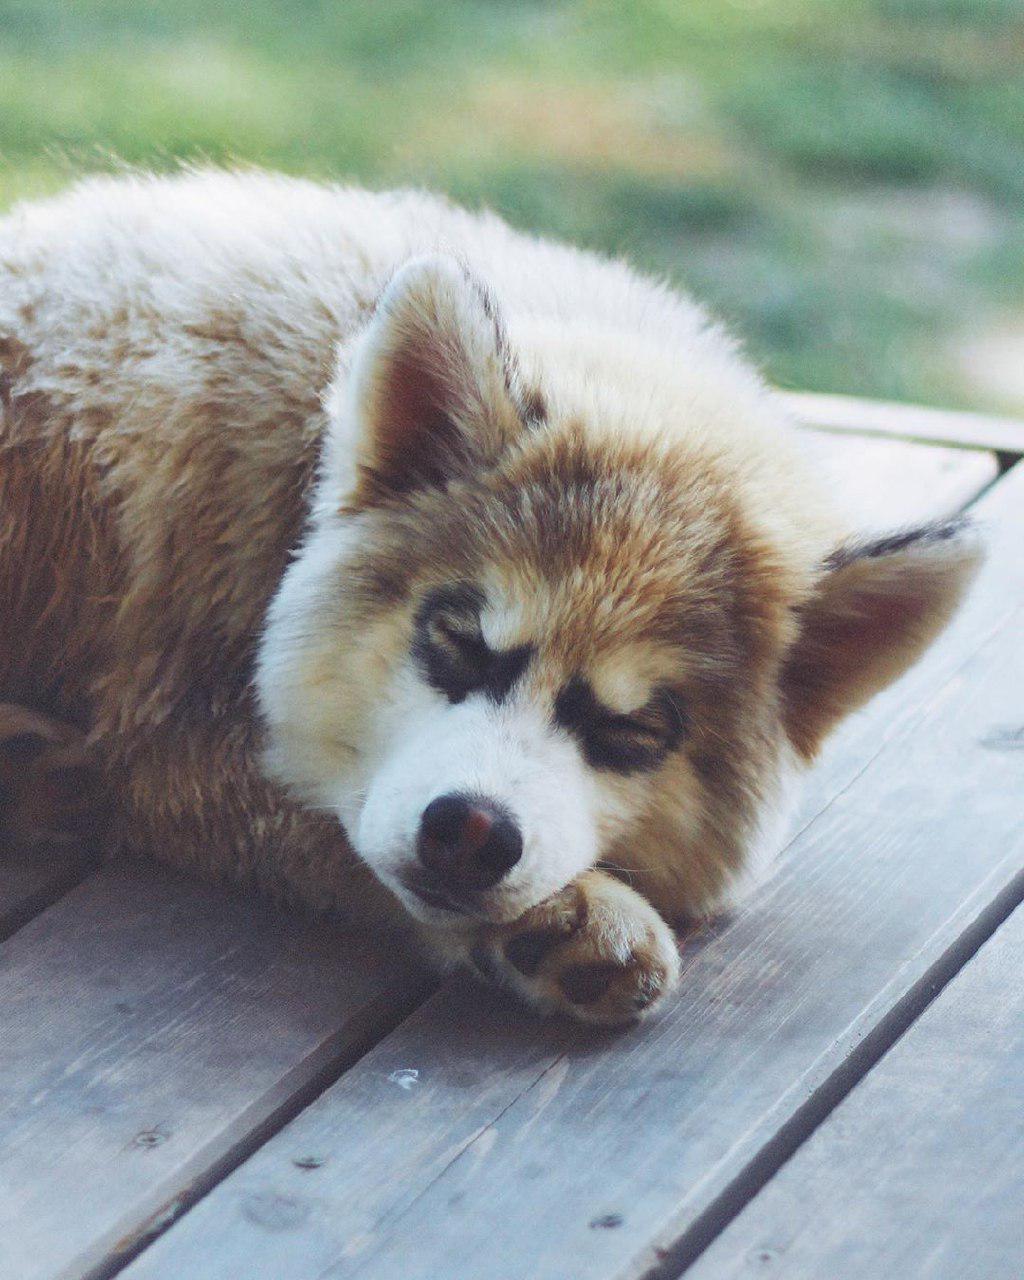 A Husky puppy sleeping on the wooden floor in the backyard